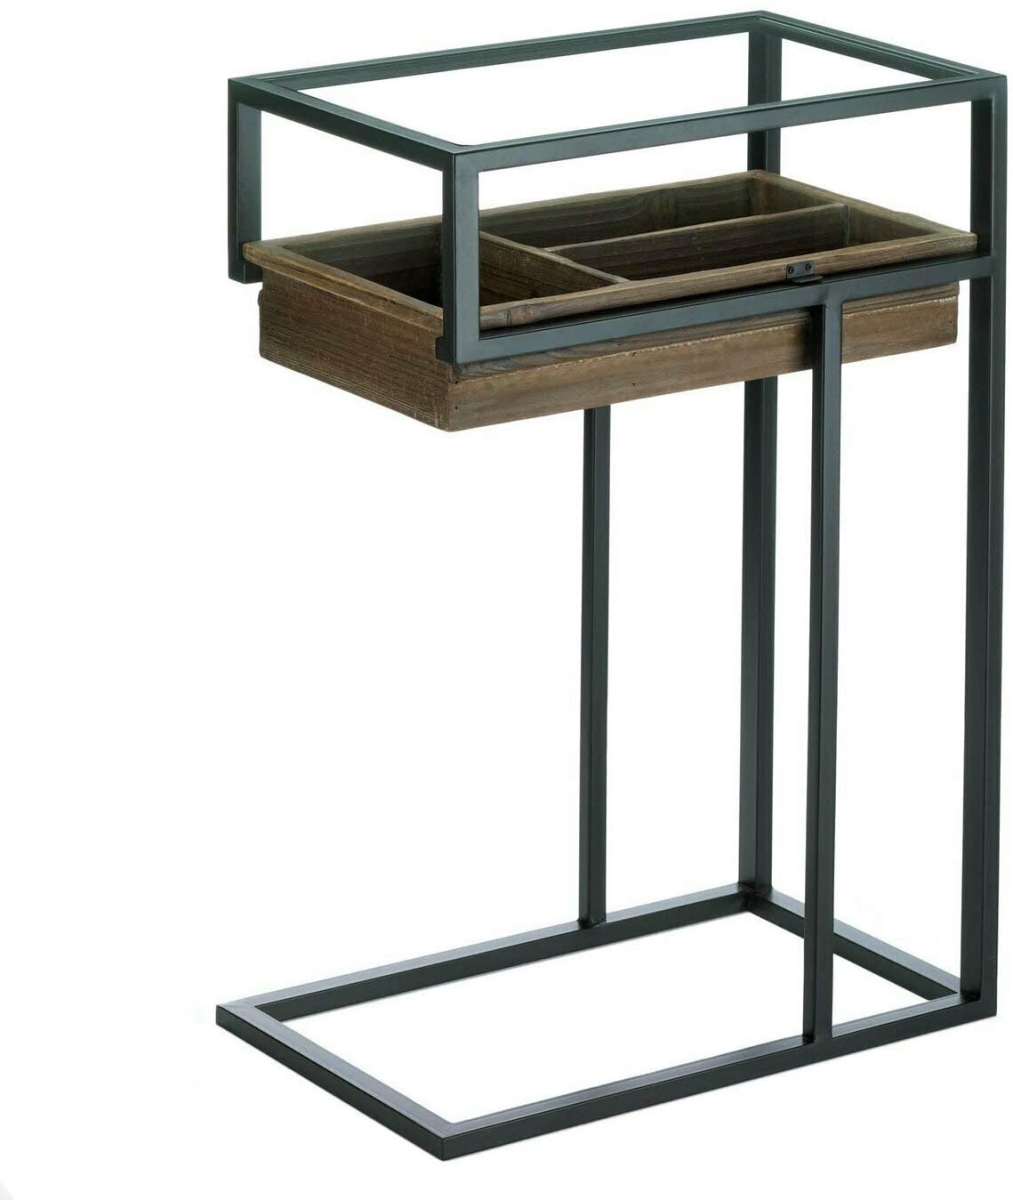 10019015 Side Table With Slide Out Drawer, Blue